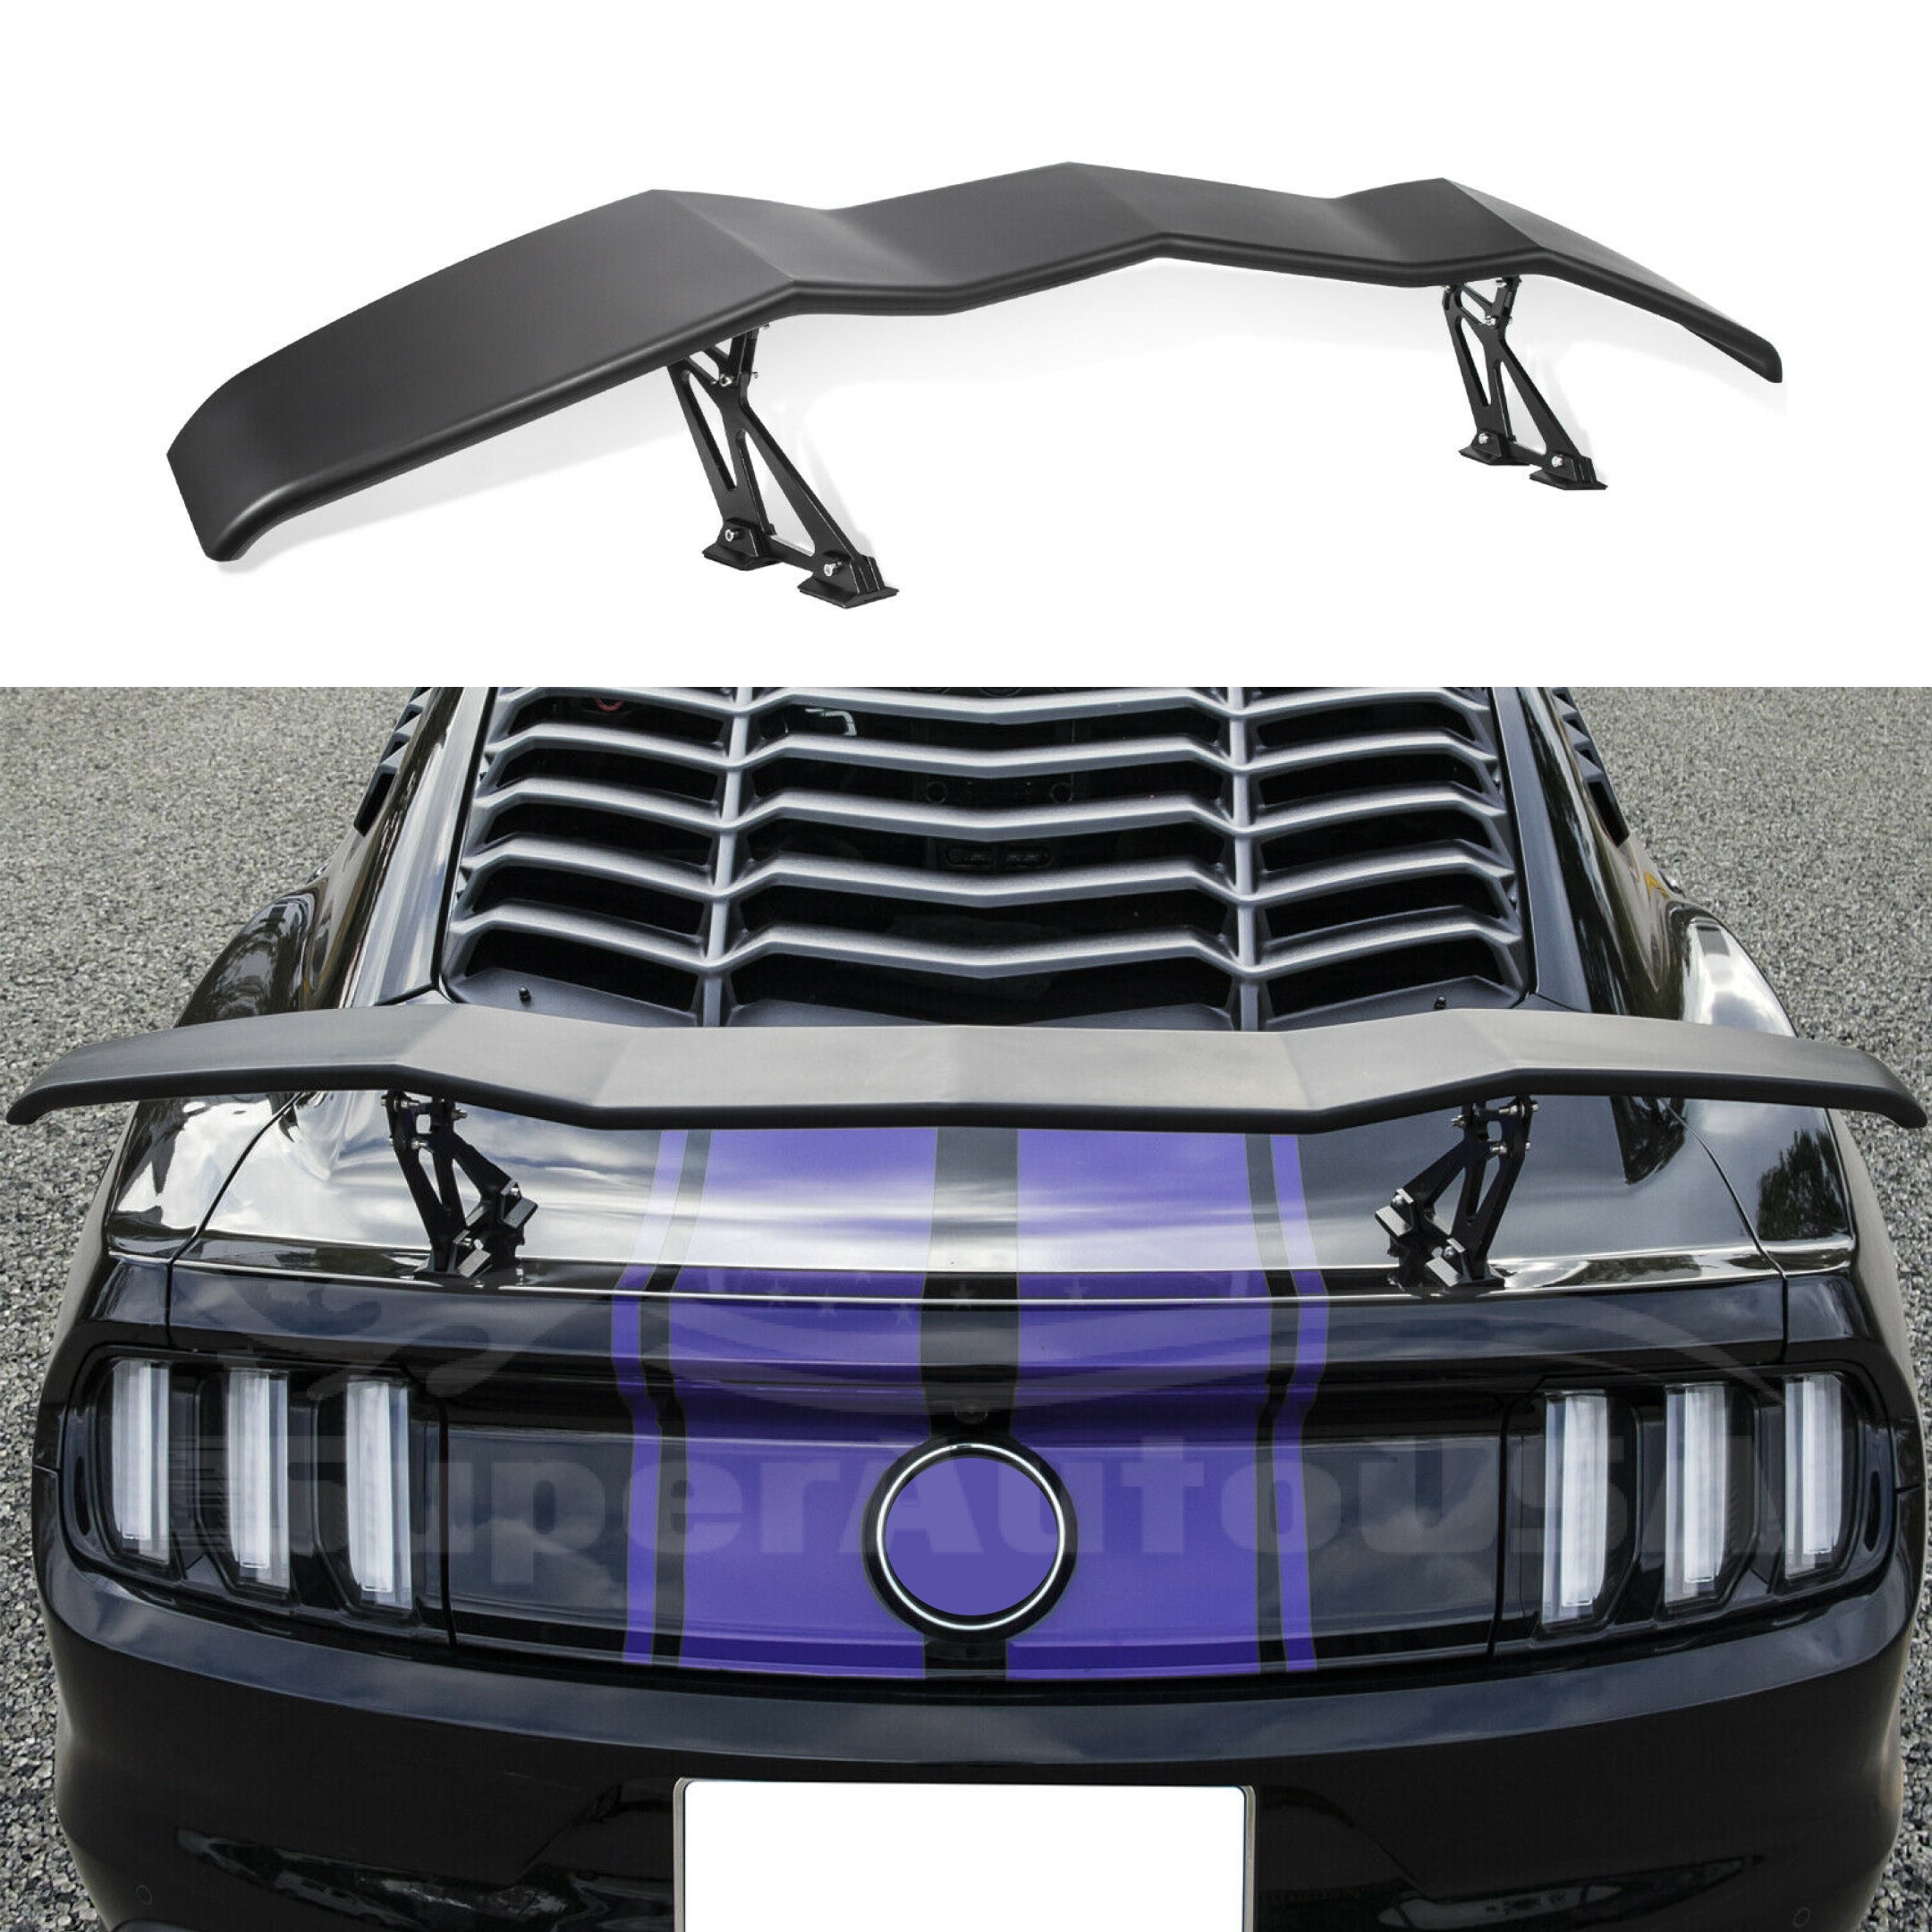 Rear Spoiler & Wings - GT Lambo Style | Fits Ford Mustang  (All Year) - 0